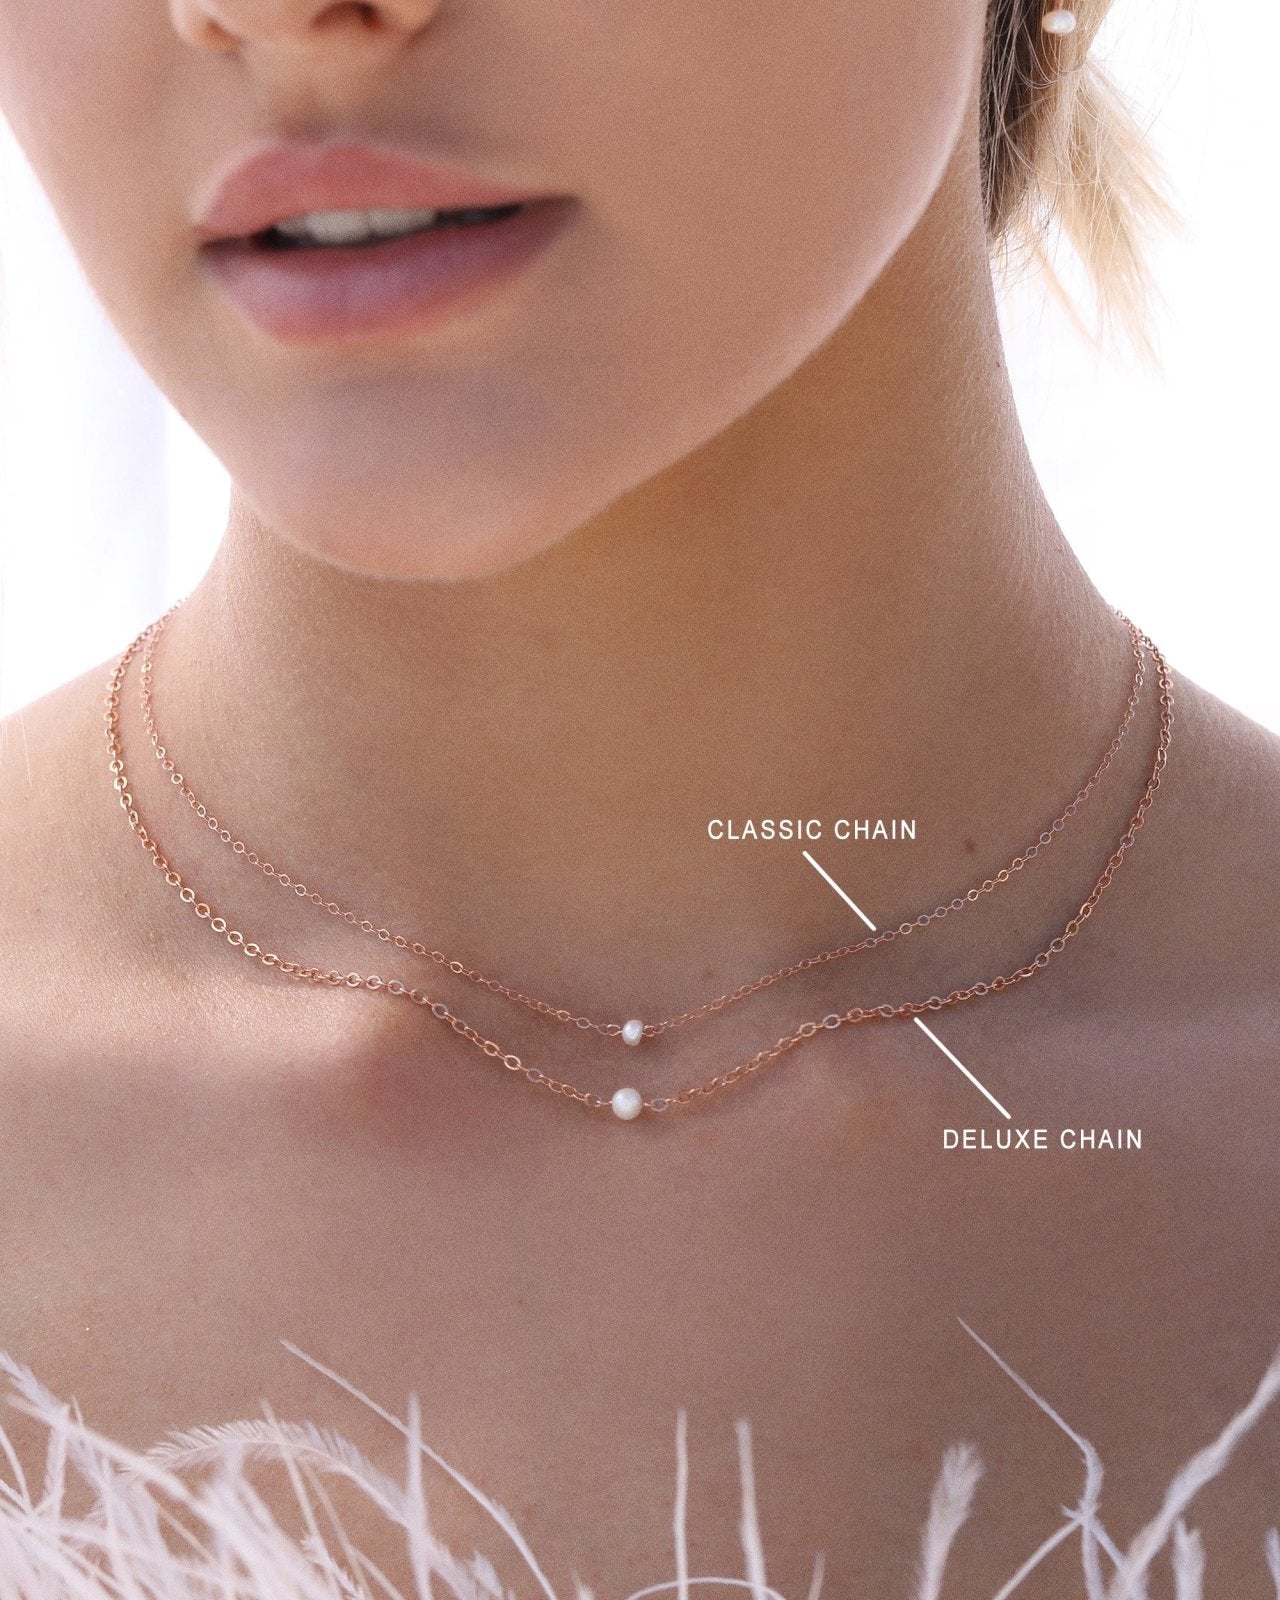 SMALL FRESHWATER PEARL NECKLACE- 14k Rose Gold - The Littl - Deluxe Chain - 37cm (choker)